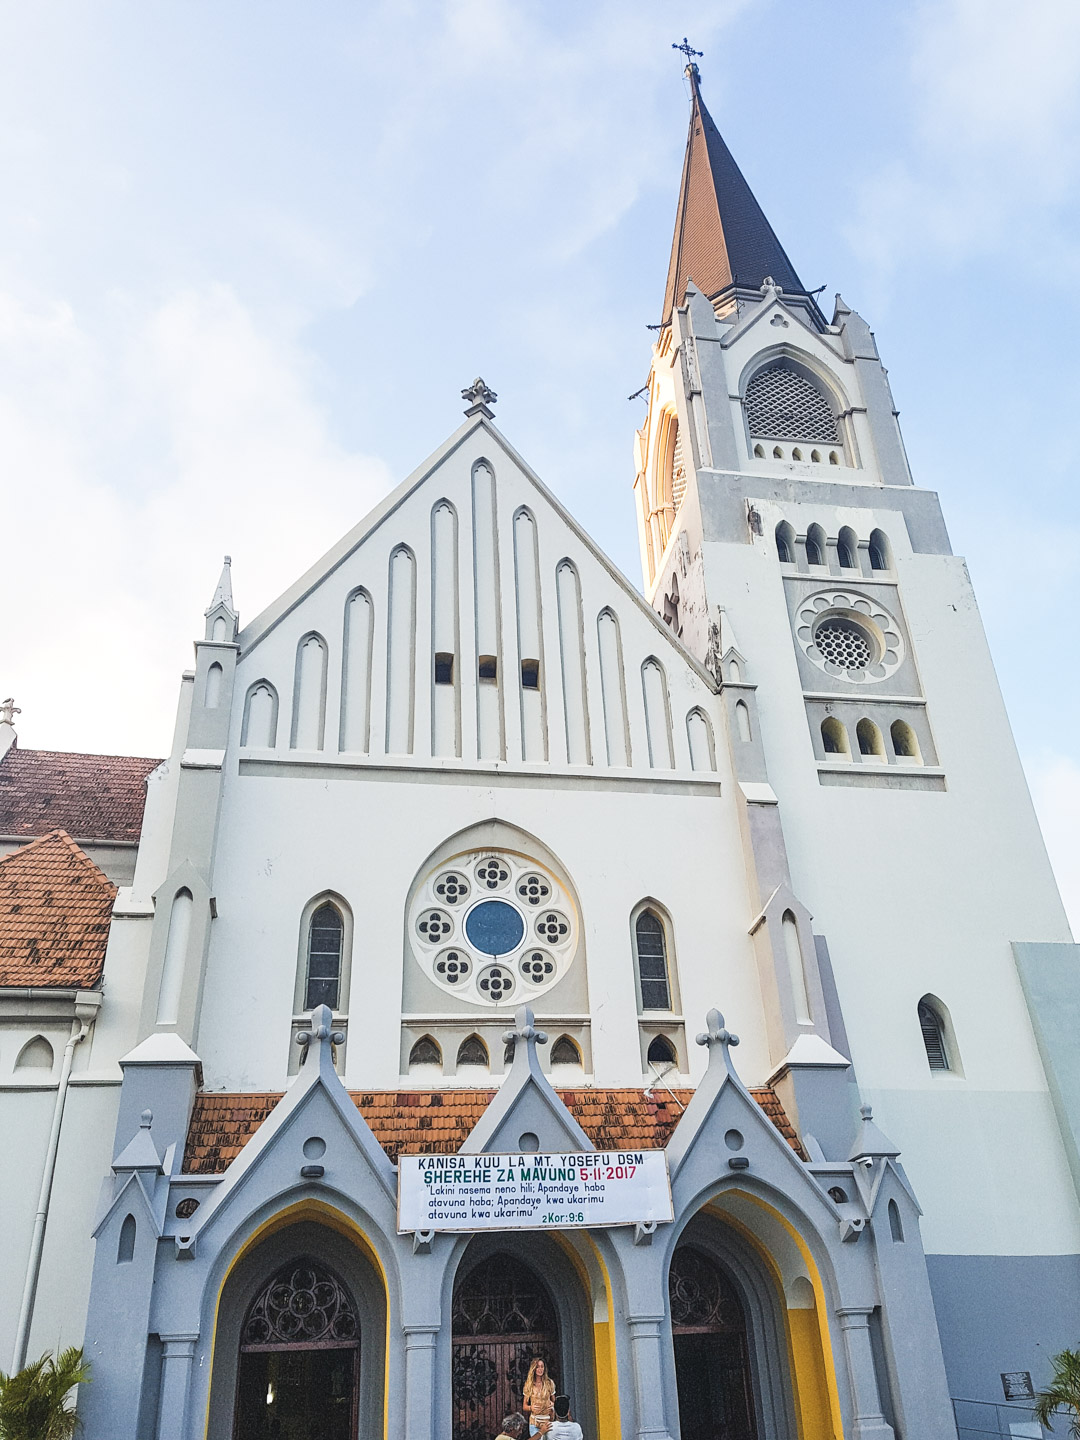 St Joseph's Cathedral. Have a long layover or extra day in Dar es Salaam? Wondering how to spend your time in this big African city? Here's your perfect one day itinerary!